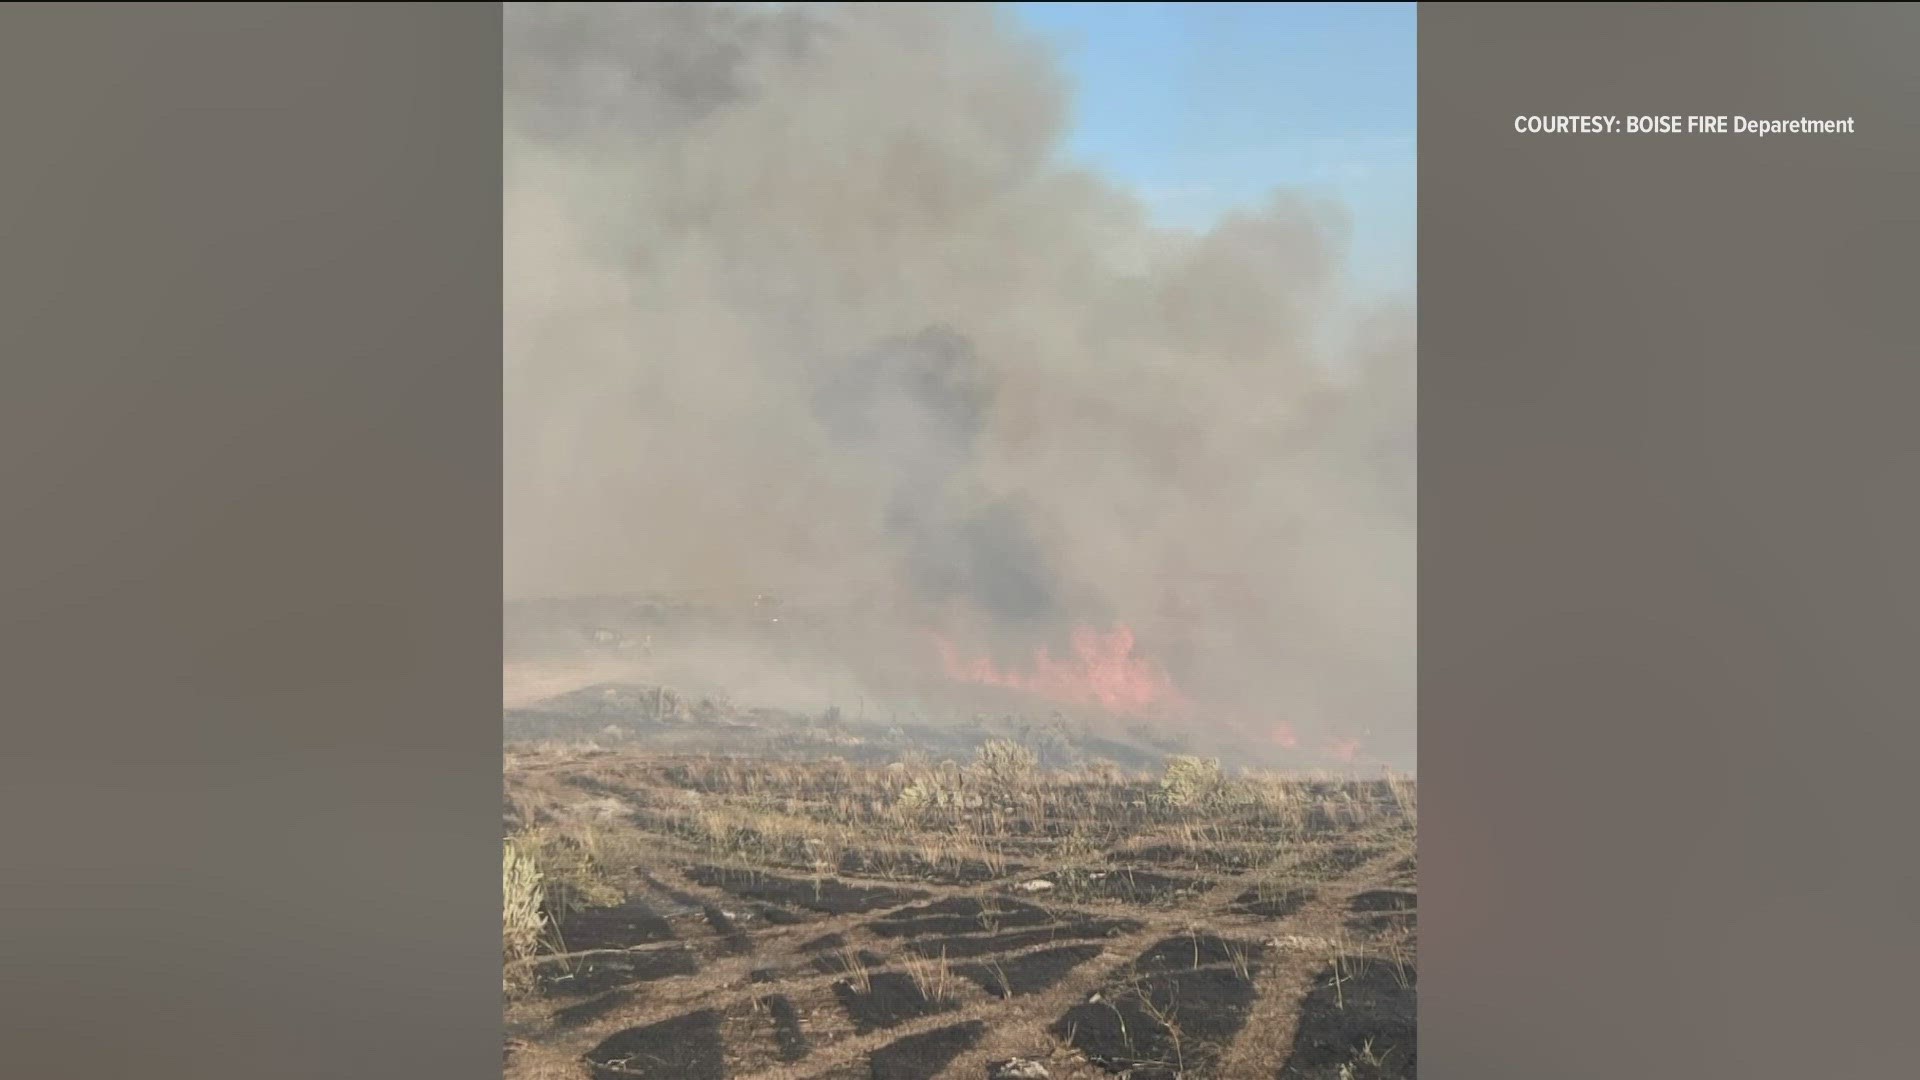 The Bonneville Fire near Lucky Peak was discovered Wednesday morning. It has burned nearly 150 acres, according to the Boise District BLM.